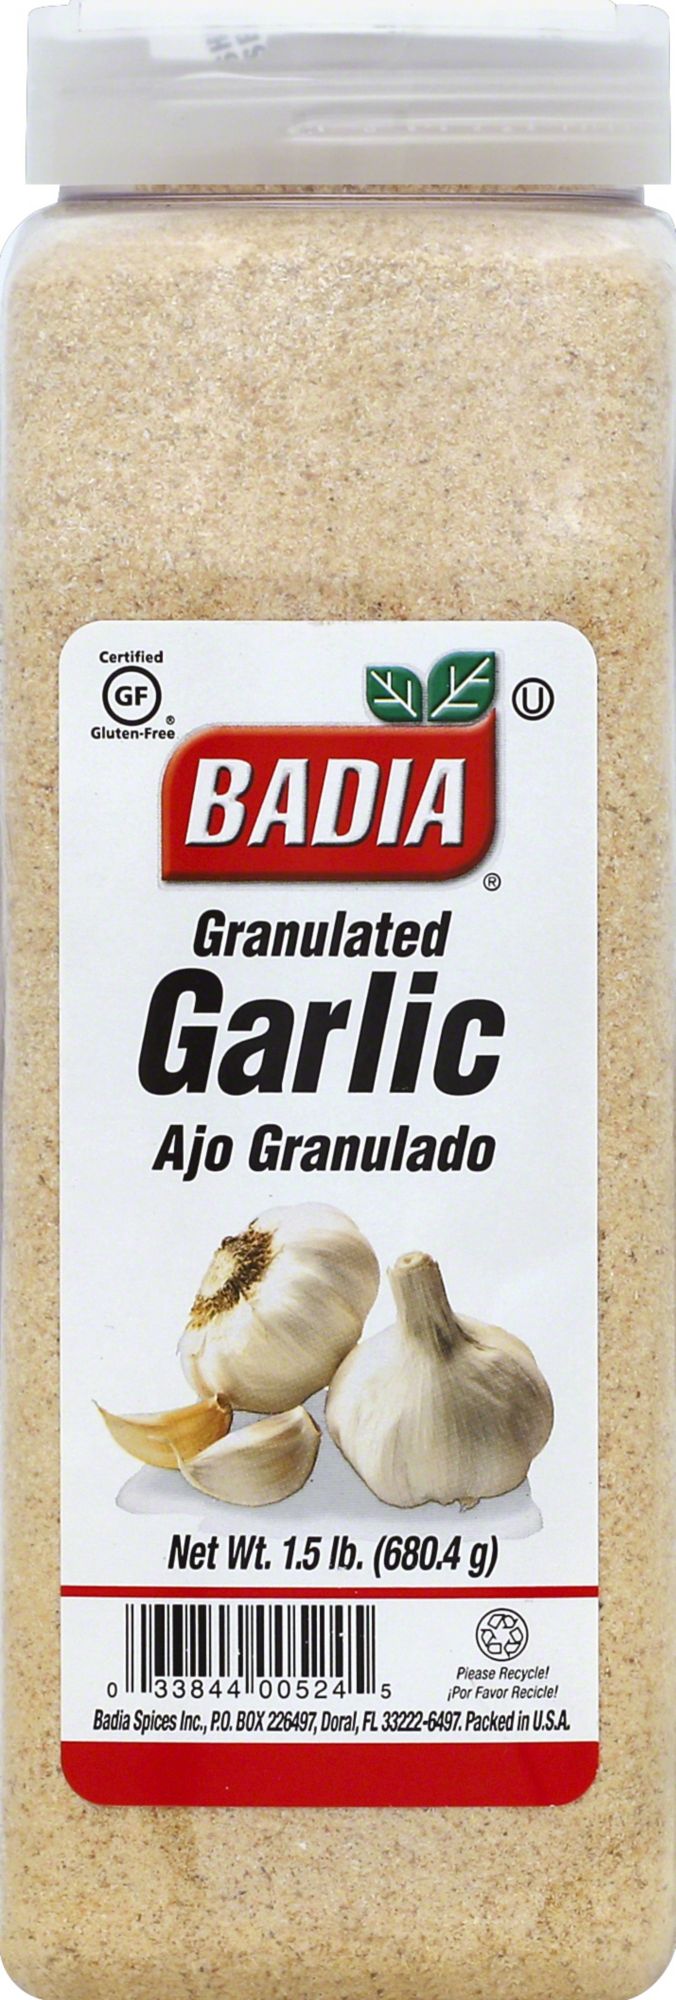 Spices & Herbs - Badia Spices